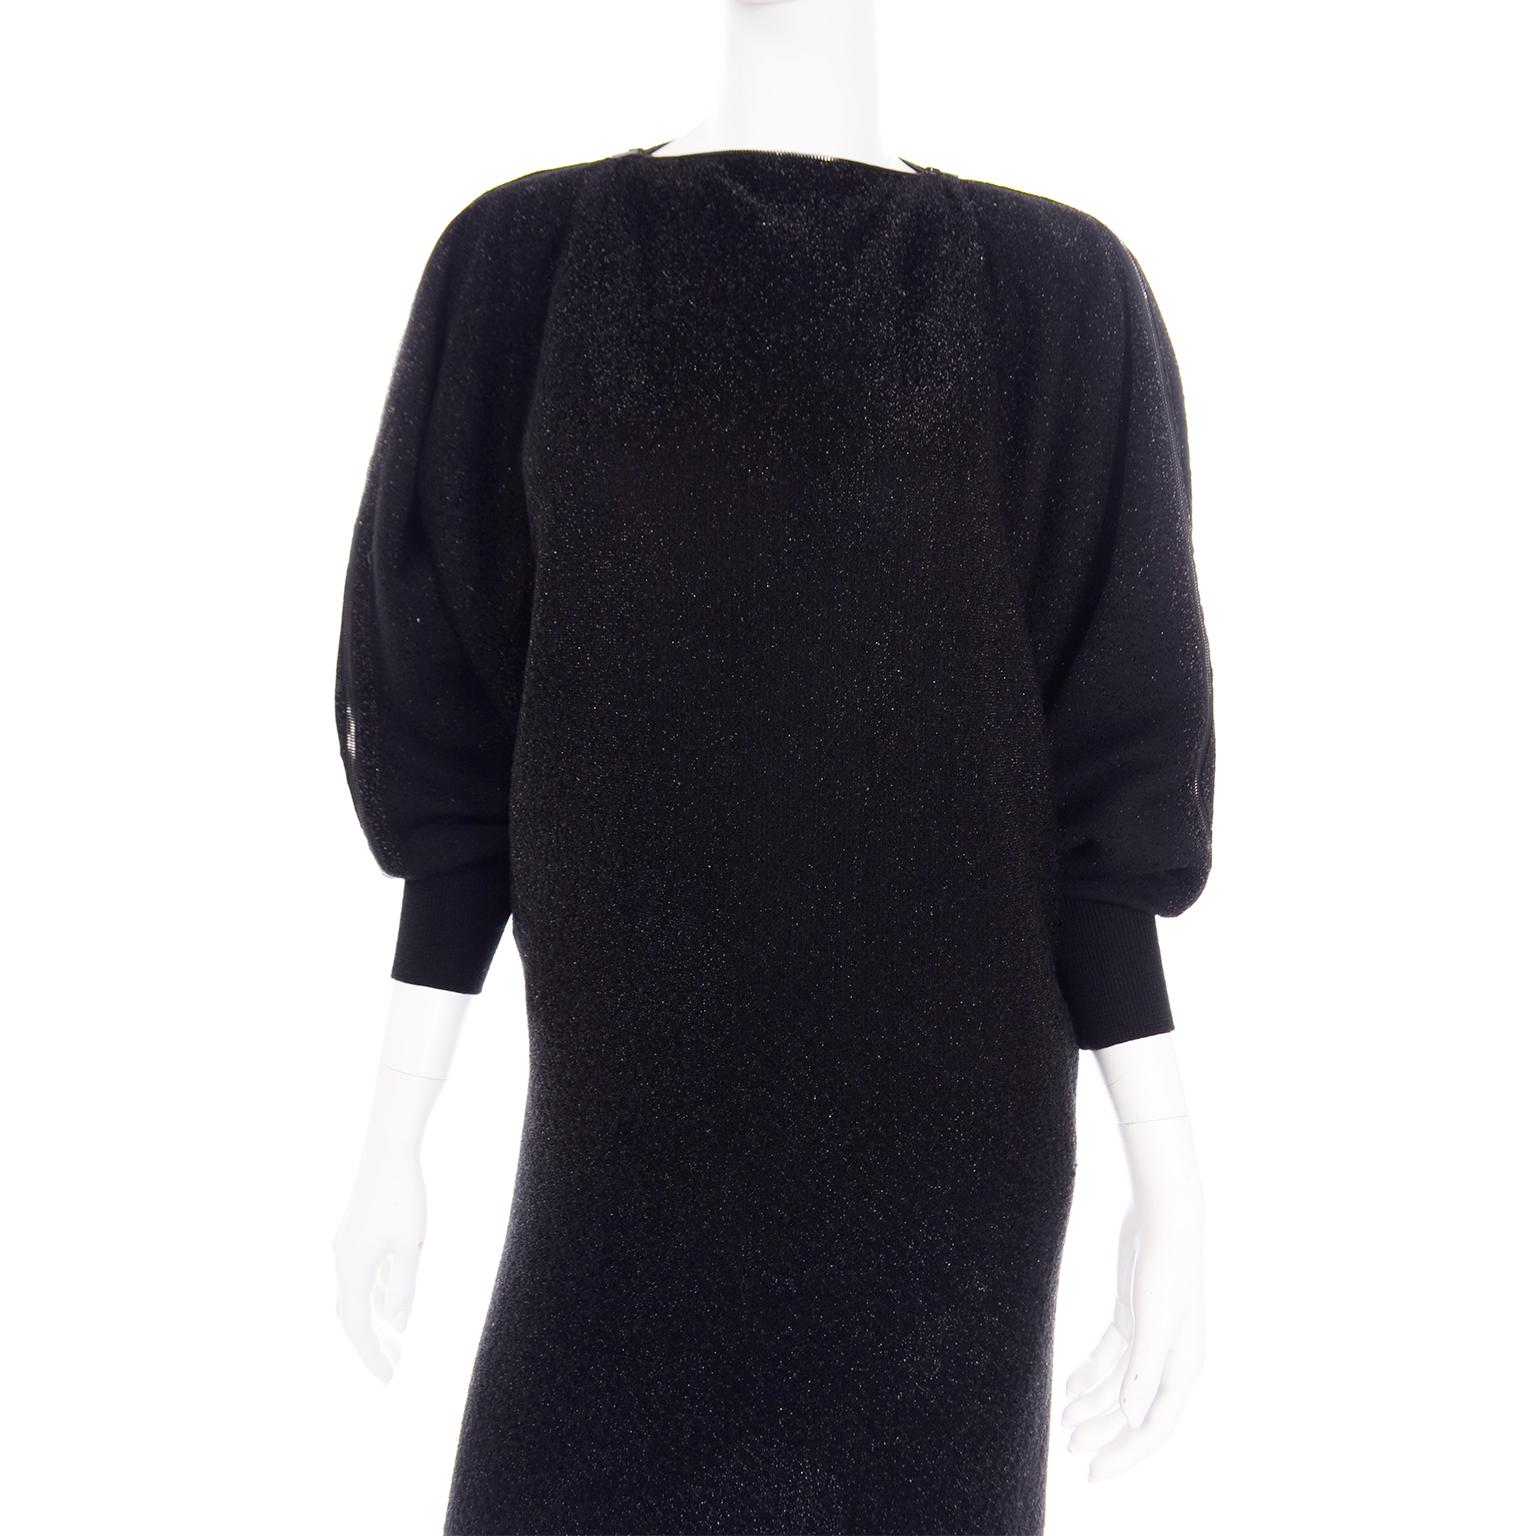 Jean Paul Gaultier Vintage Black Sparkle Zipper Dress with Dramatic Sleeves 7